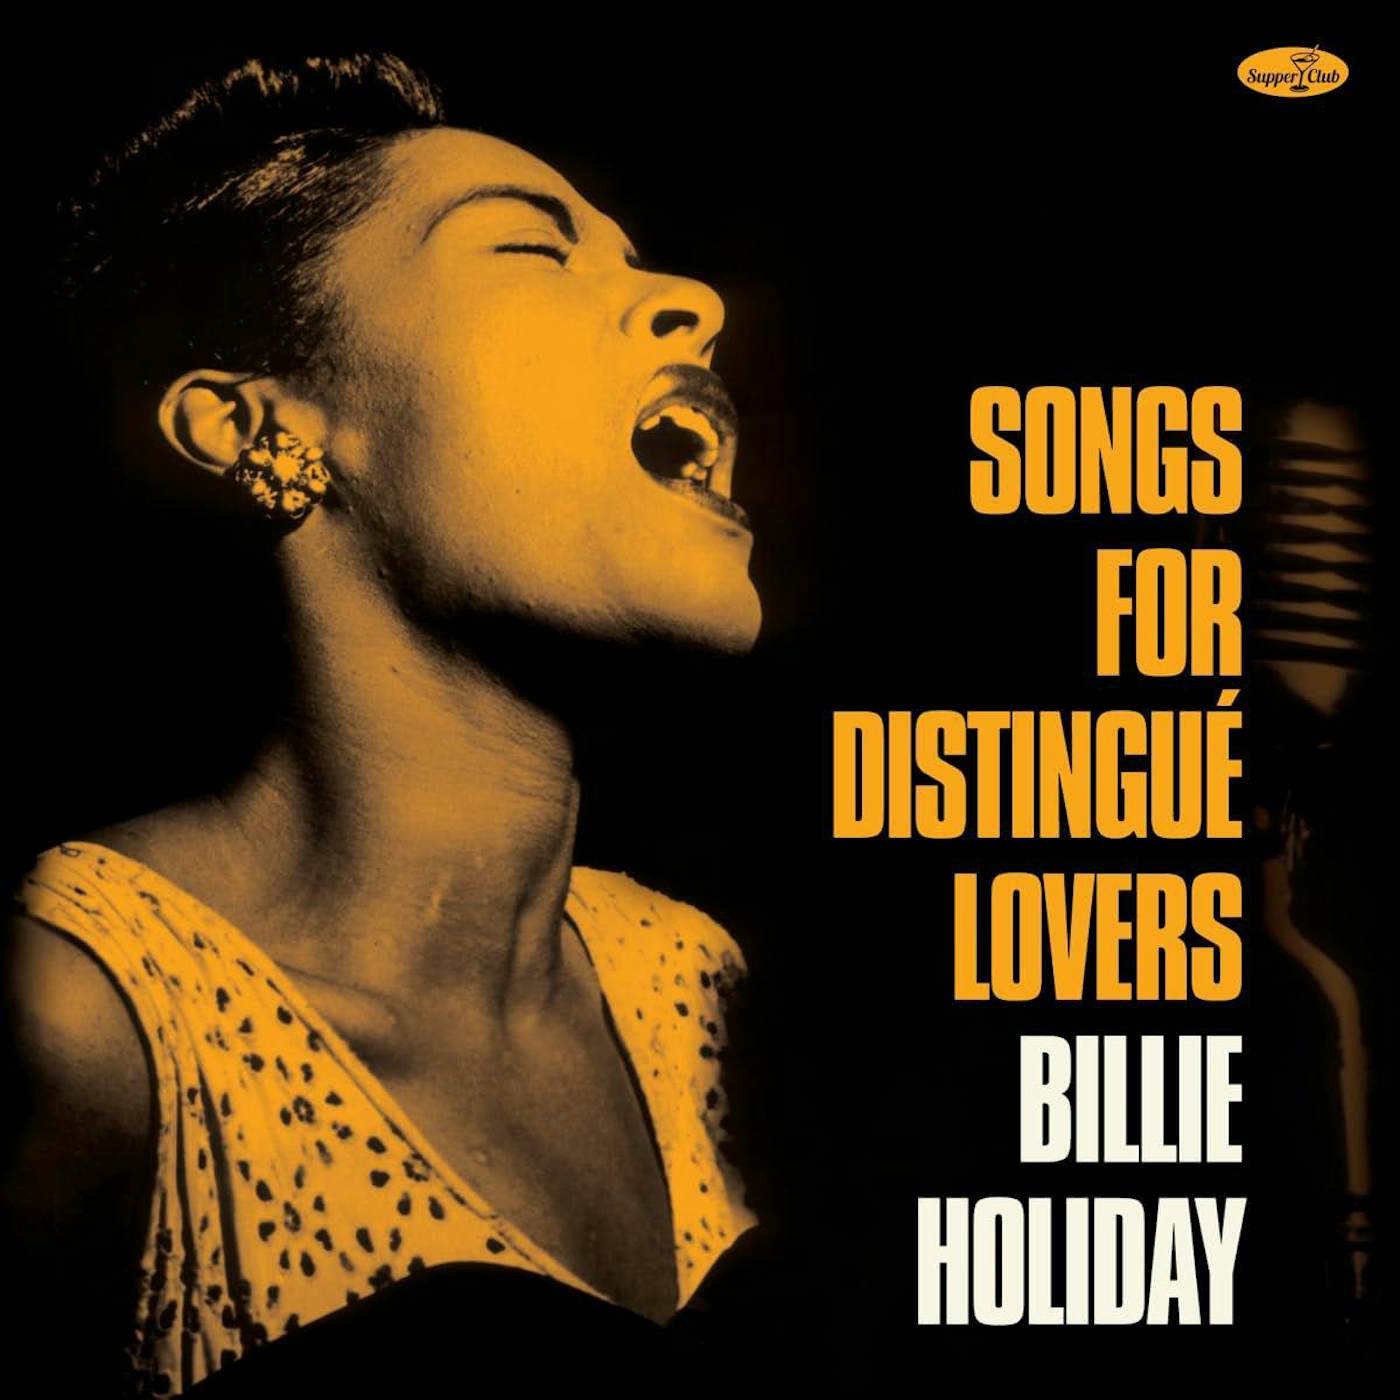 Billie Holiday Songs For Distingue Lovers Vinyl Record